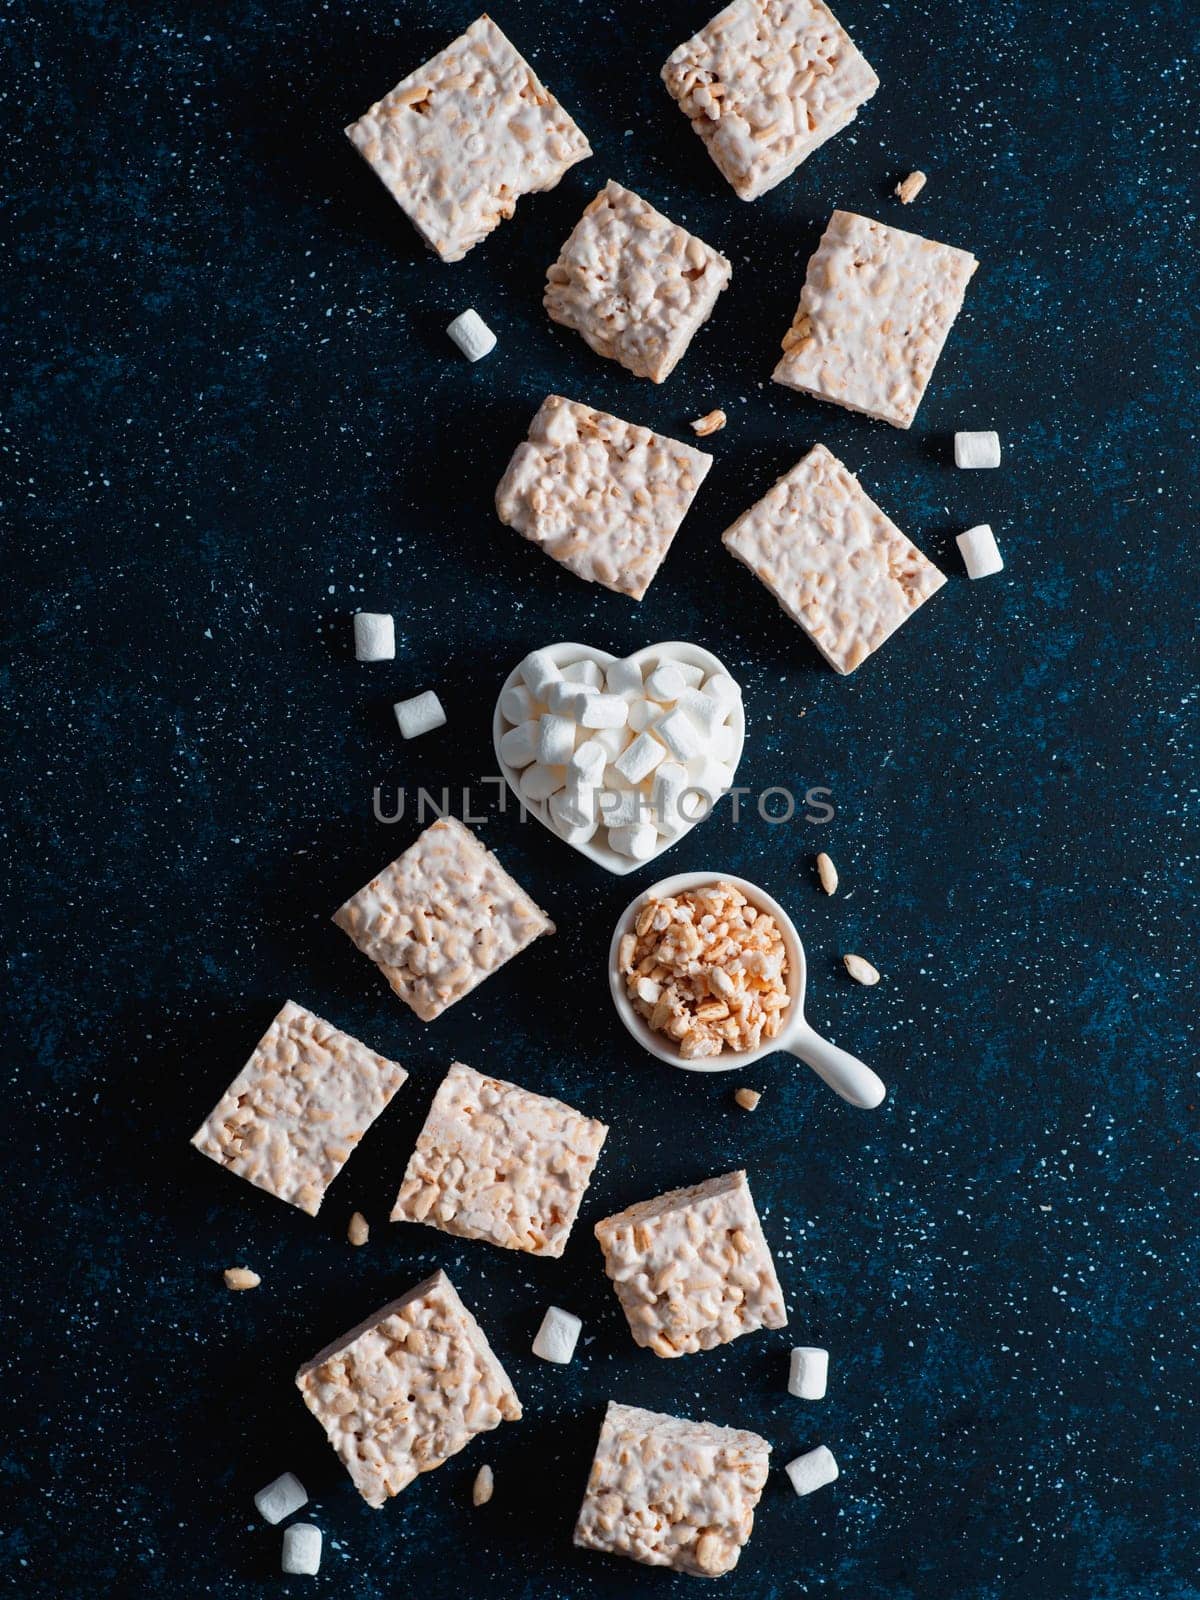 Homemade bars of Marshmallow and crispy rice by fascinadora